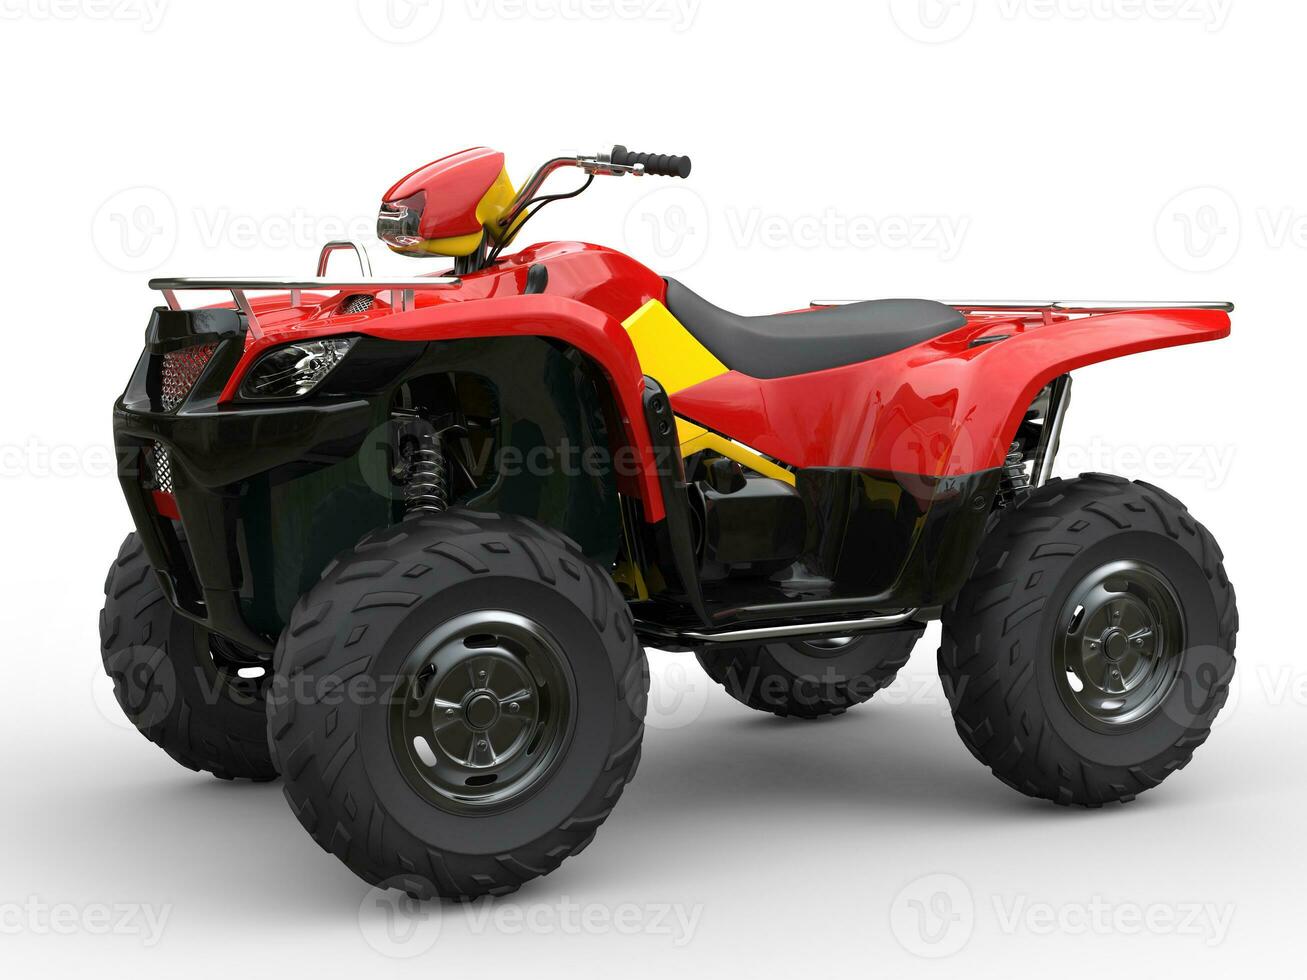 Red quad bike with yellow side panels photo